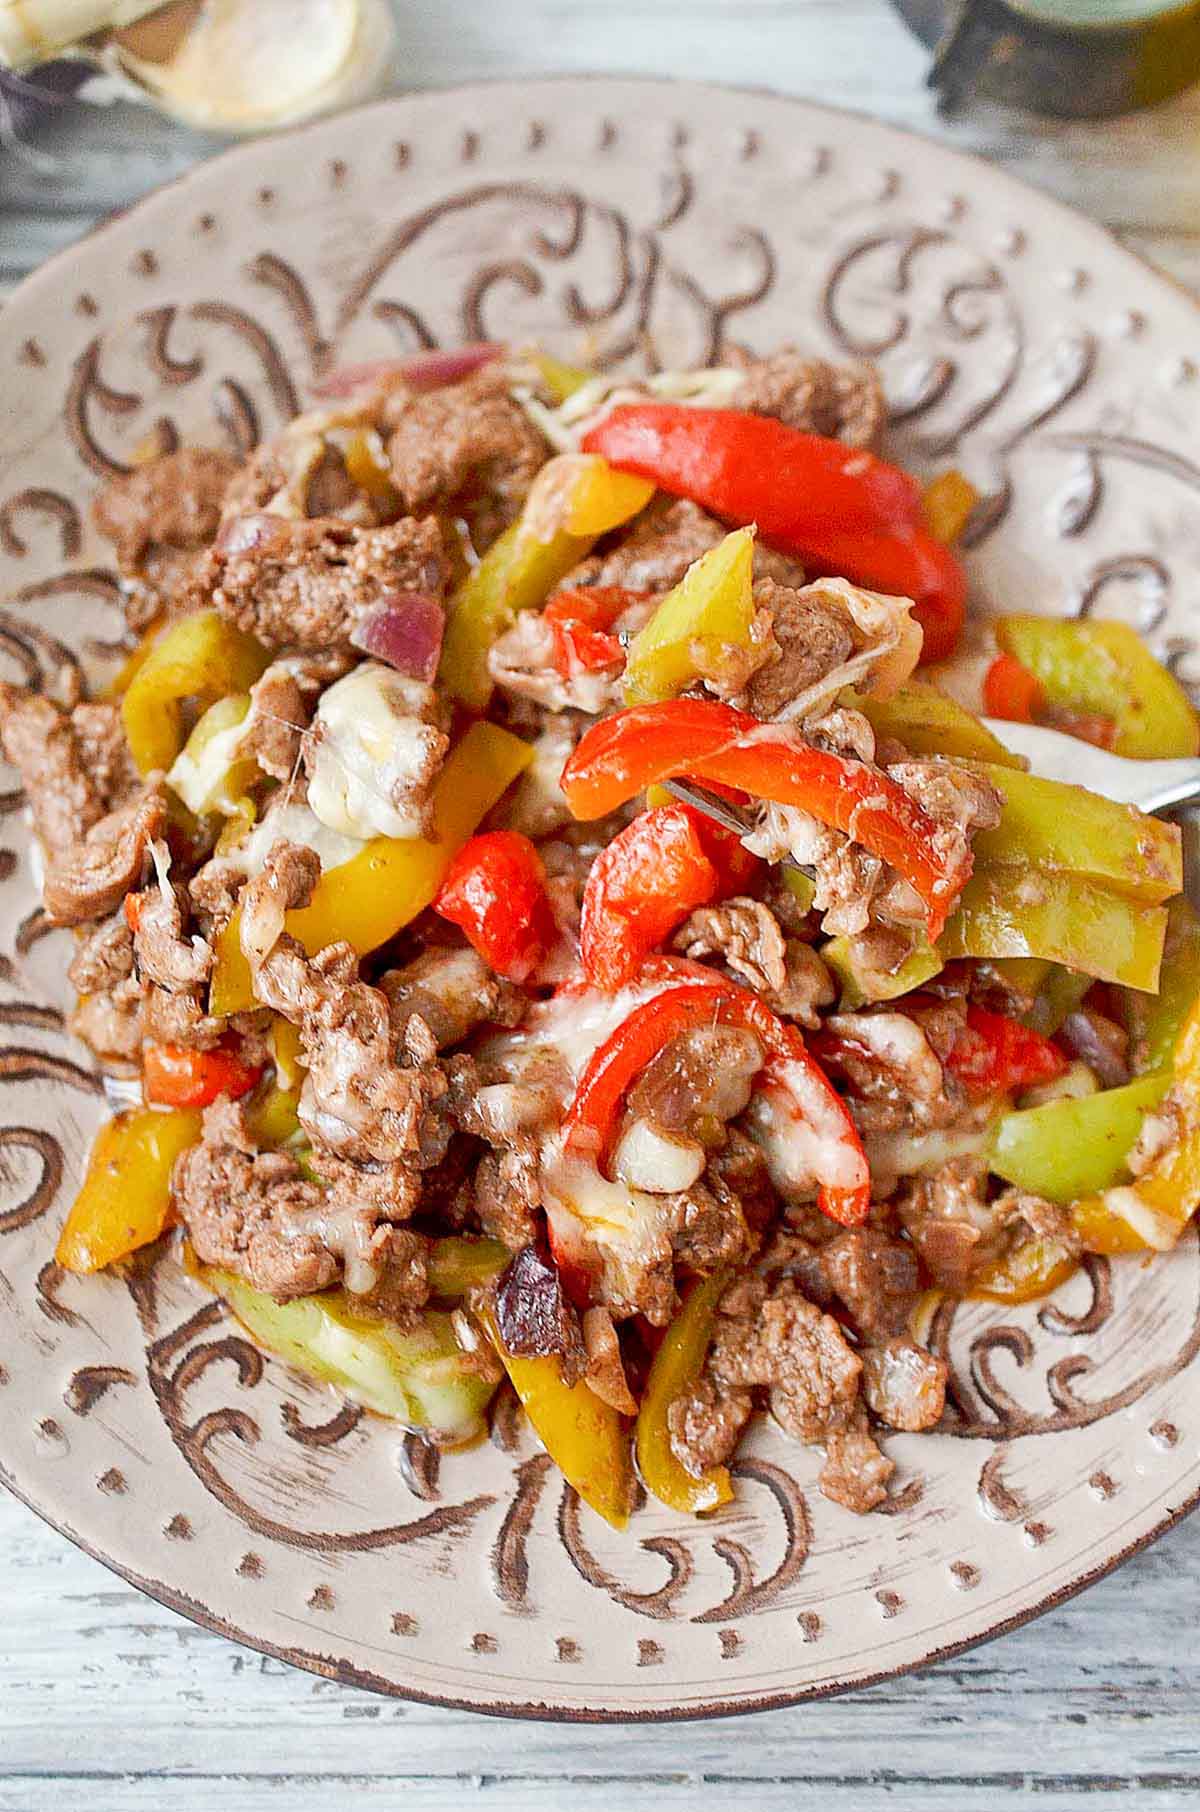 Beef and peppers on a plate.